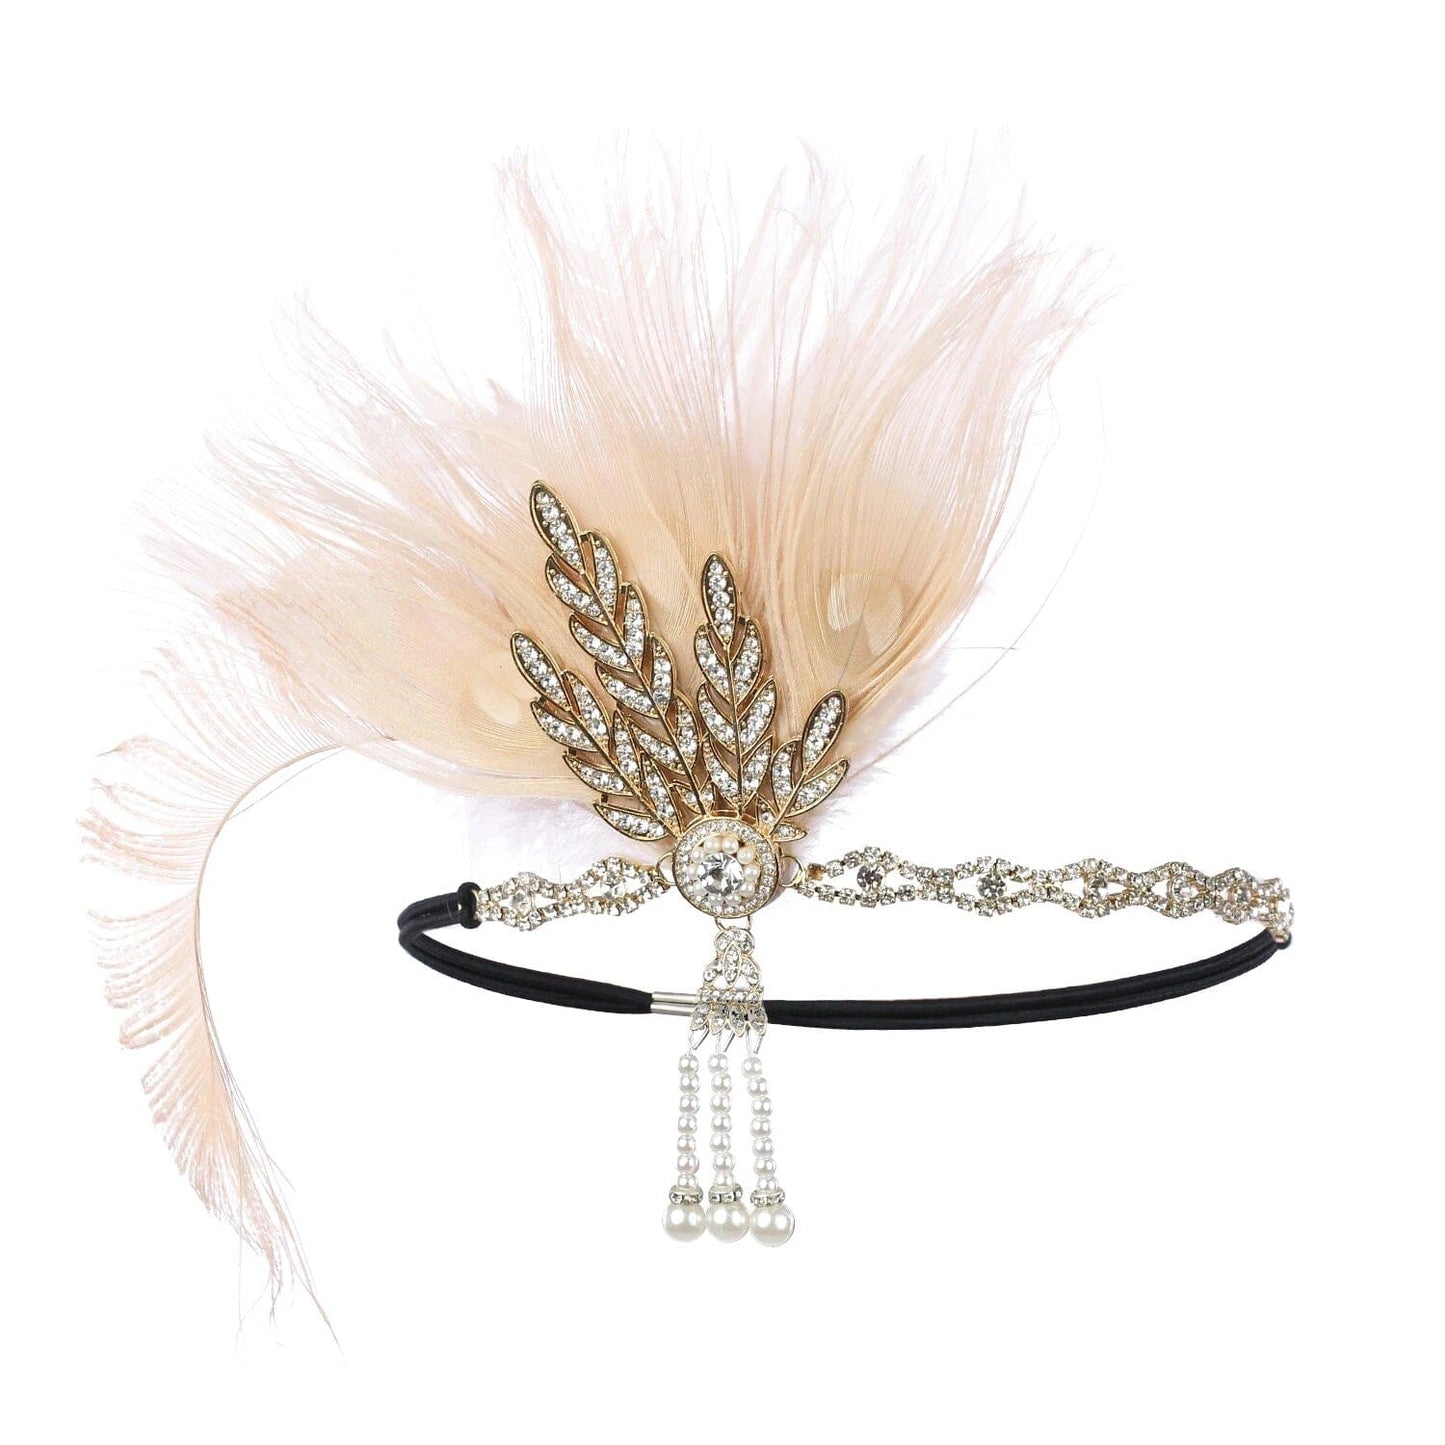 Women Peacock Feather 1920s Flapper Headpiece Vintage Party Rhinestone Hair Accessories Fascinators jehouze Pink 